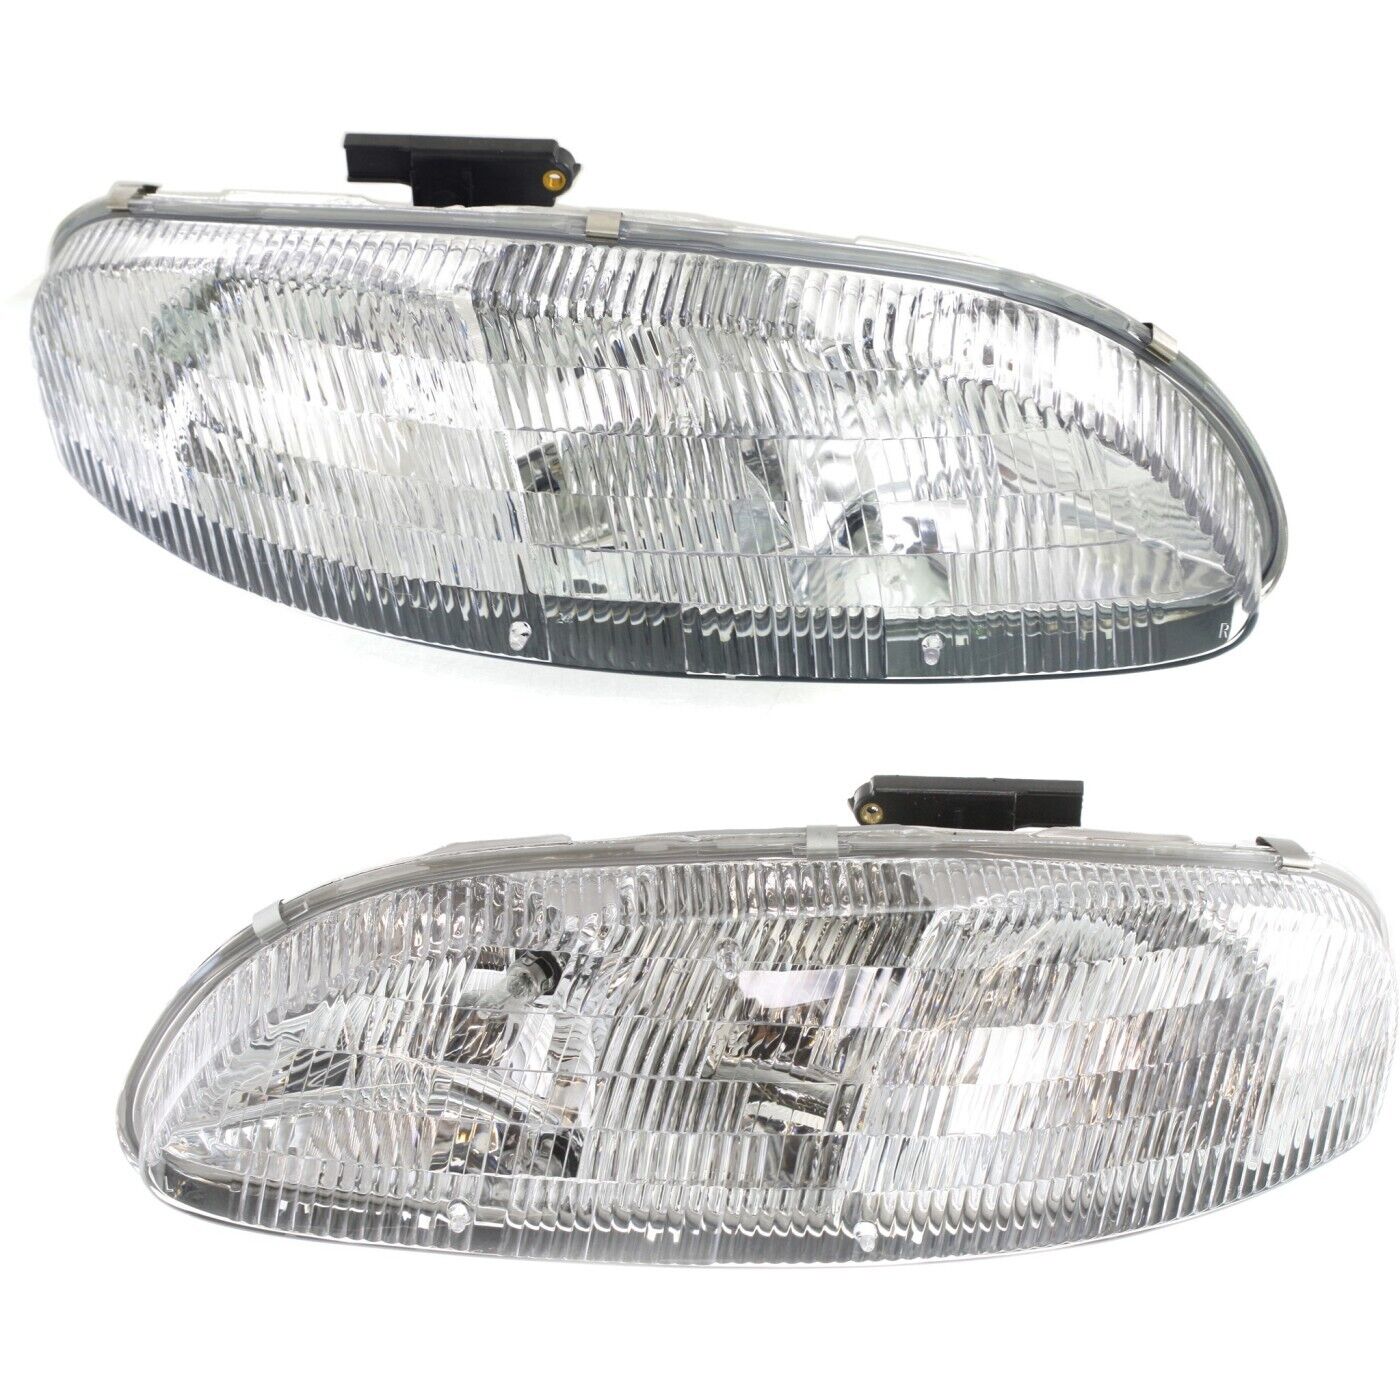 Headlights Headlamps Left & Right Pair Set NEW for Chevy Lumina Monte Carlo